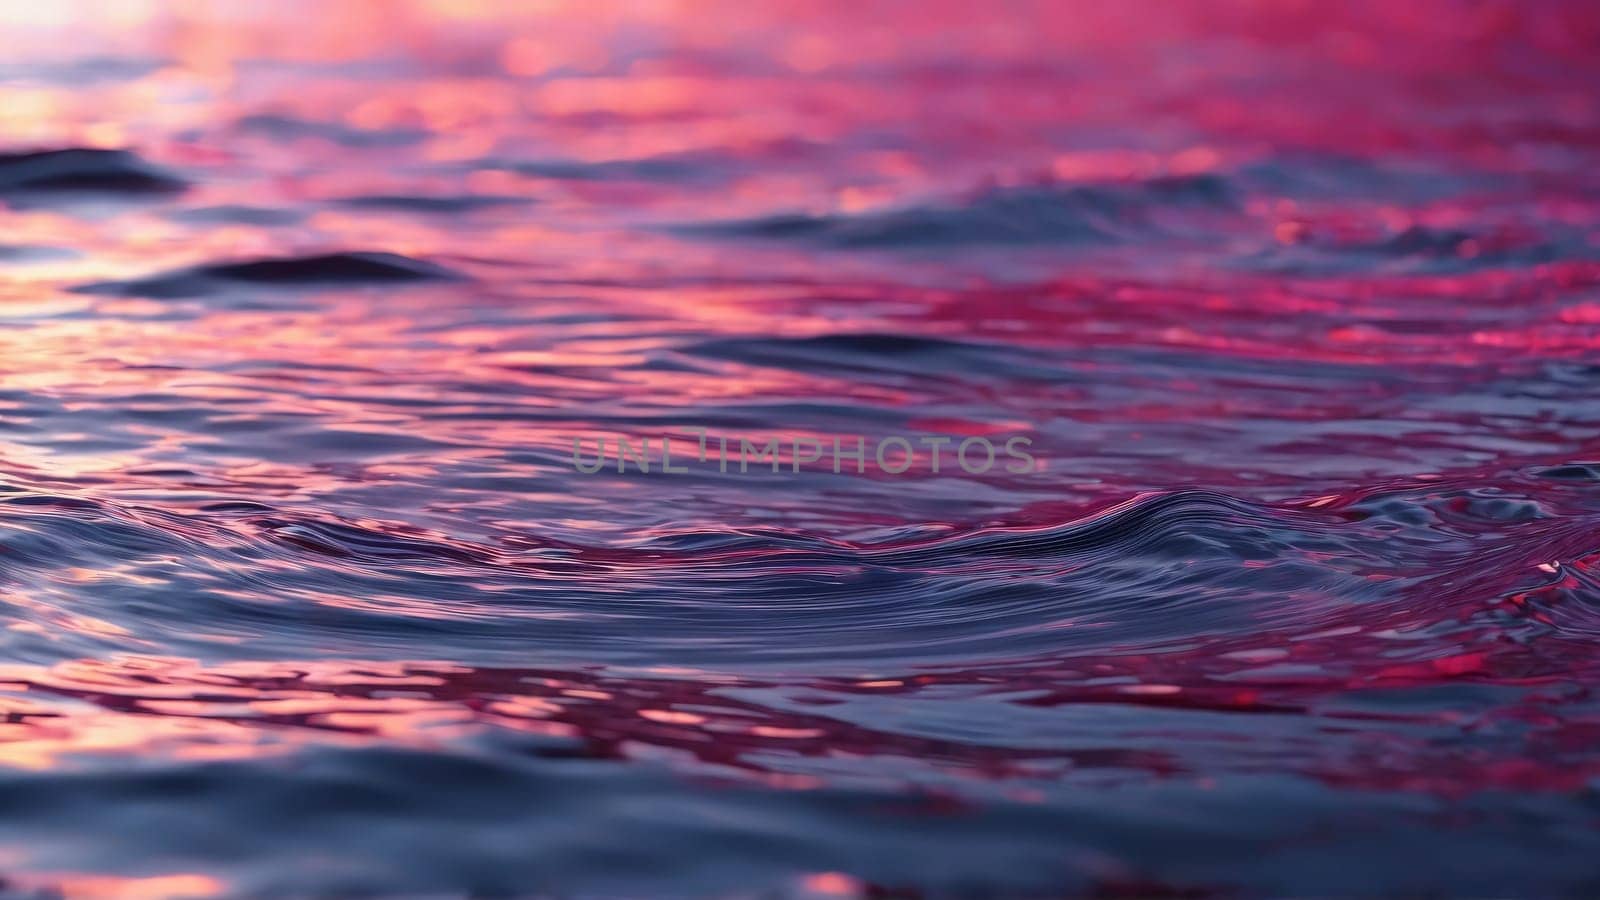 Merlot pearl descending into crystalline waters vivid eventide hues stylishly uncluttered eye catching shot Abstract background by panophotograph